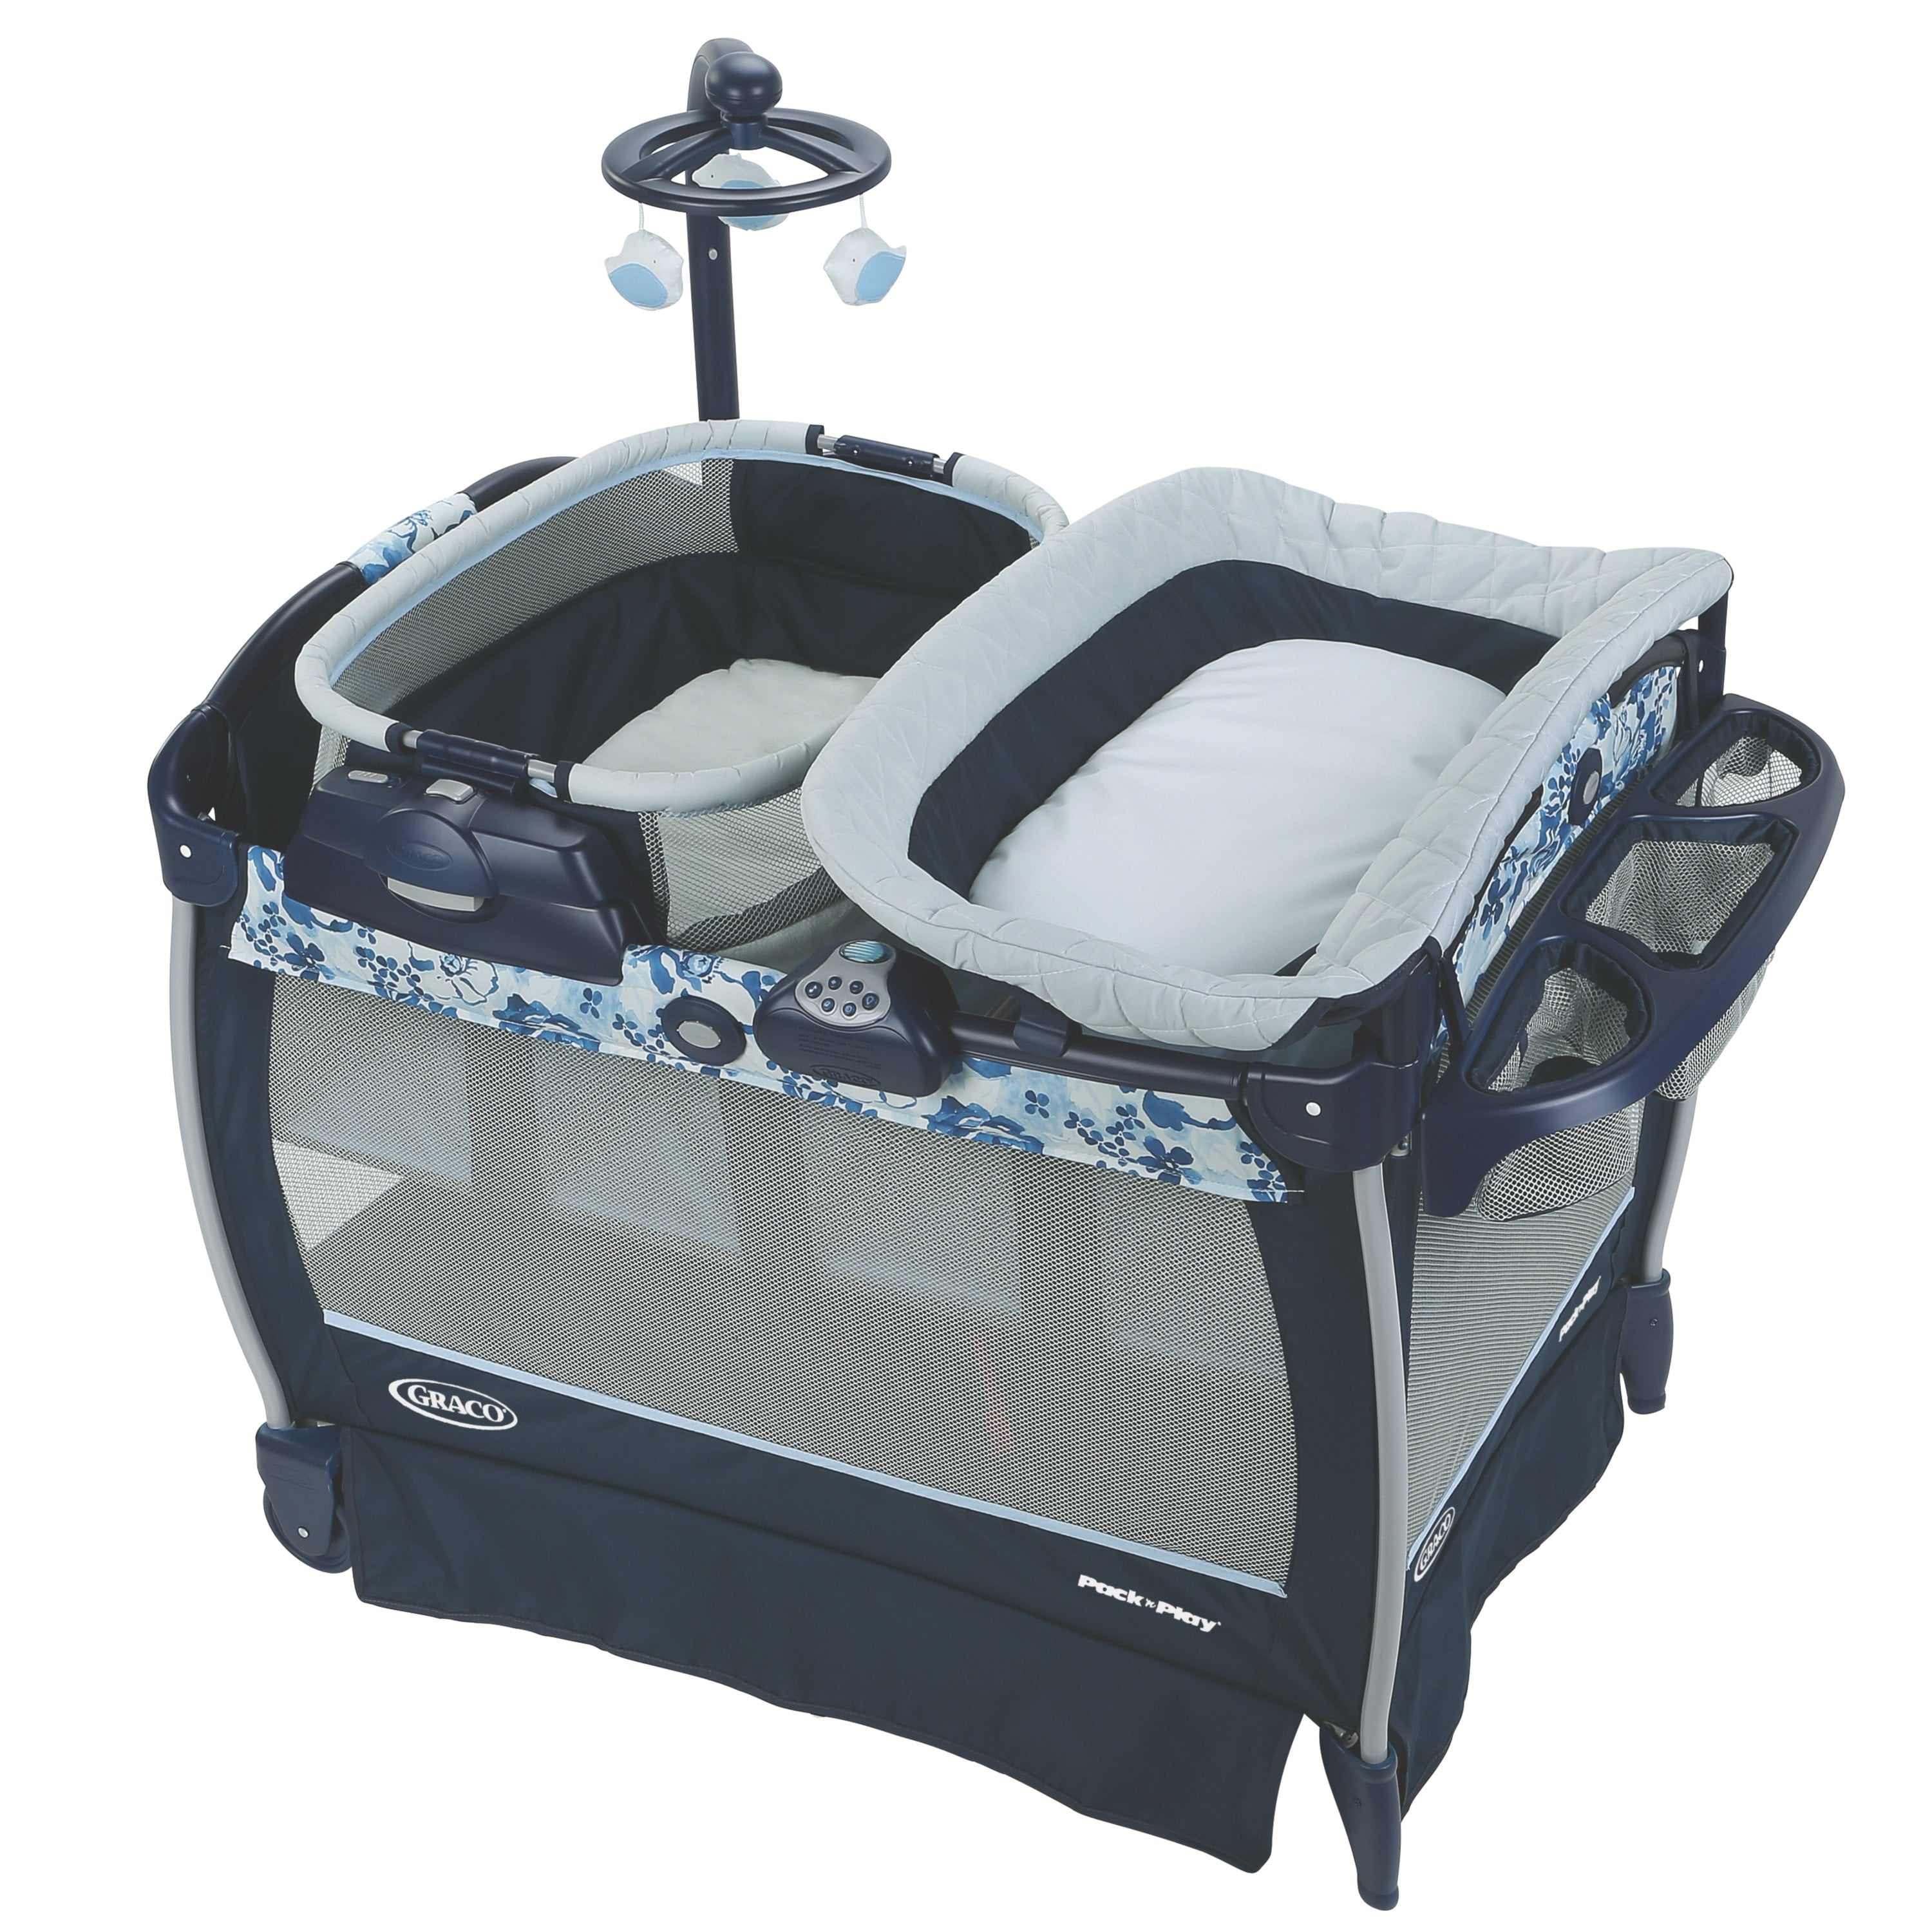  Graco Pack and Play Portable Playard, Push Button